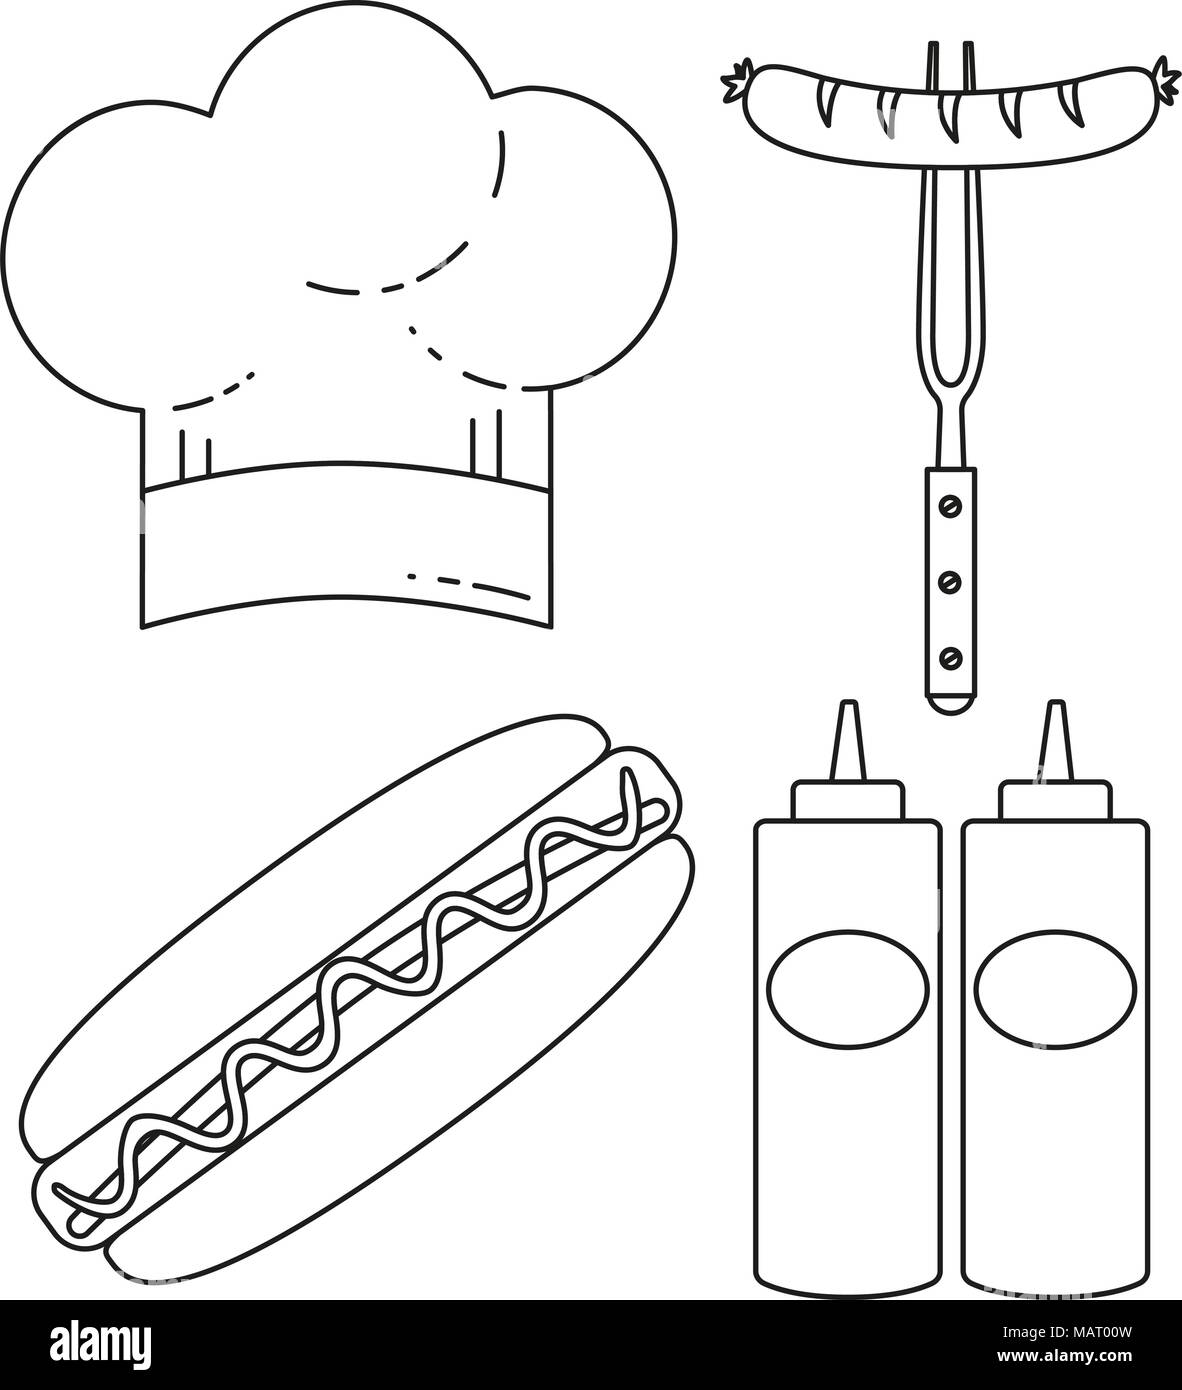 Line art black and white hot dog cooking set. Food themed vector illustration for gift card certificate sticker, badge, sign, stamp, logo, label, icon Stock Vector